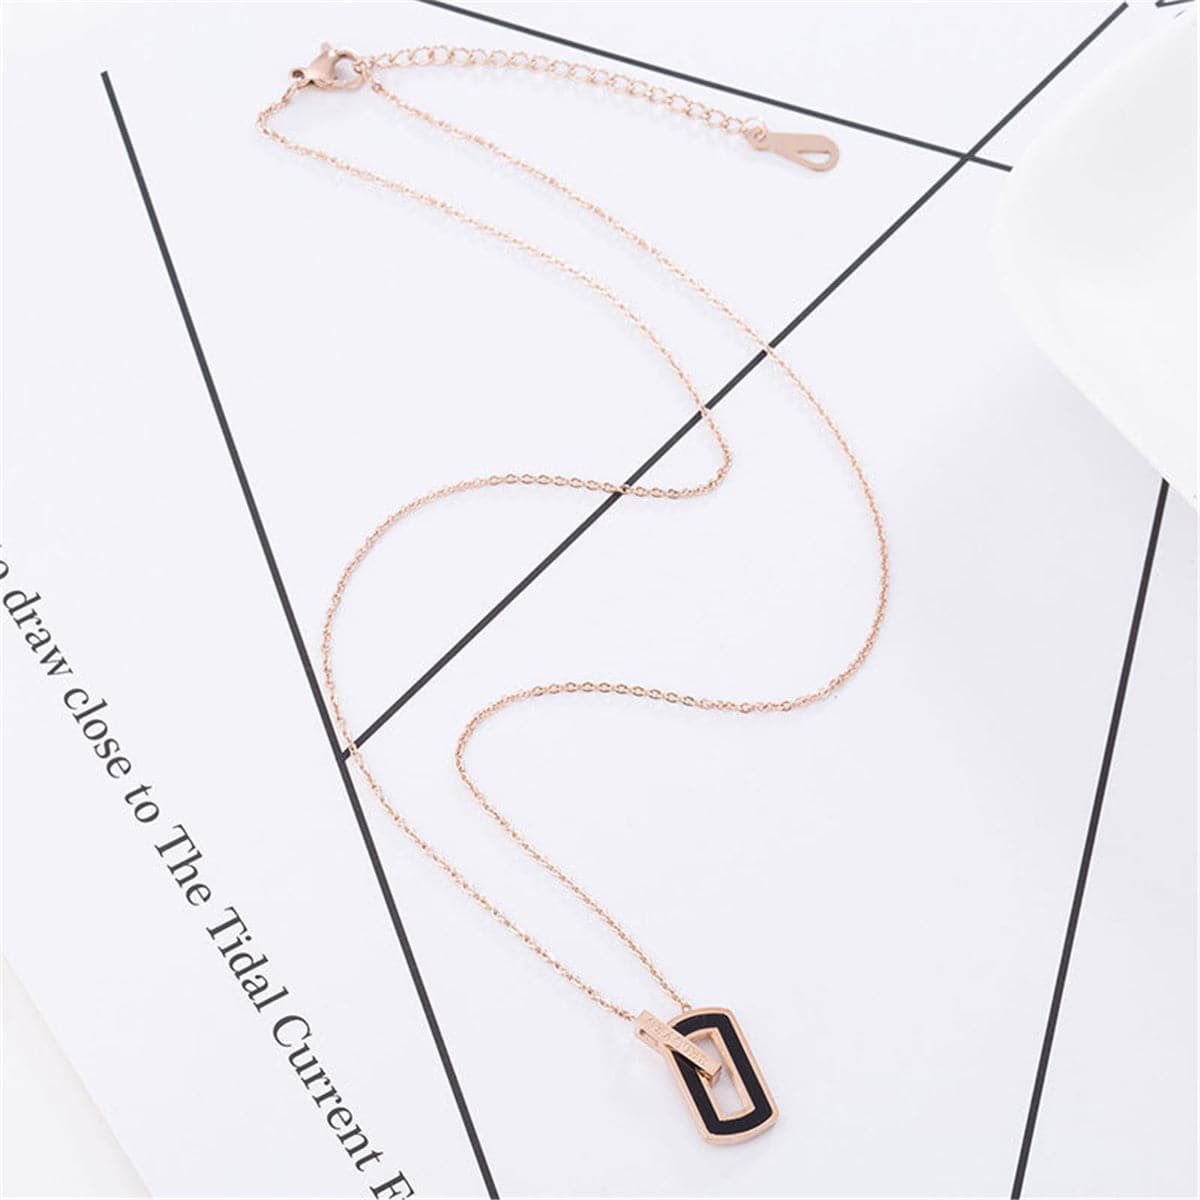 Black & 18K Rose Gold-Plated Openwork Rectangle Pendant Necklace